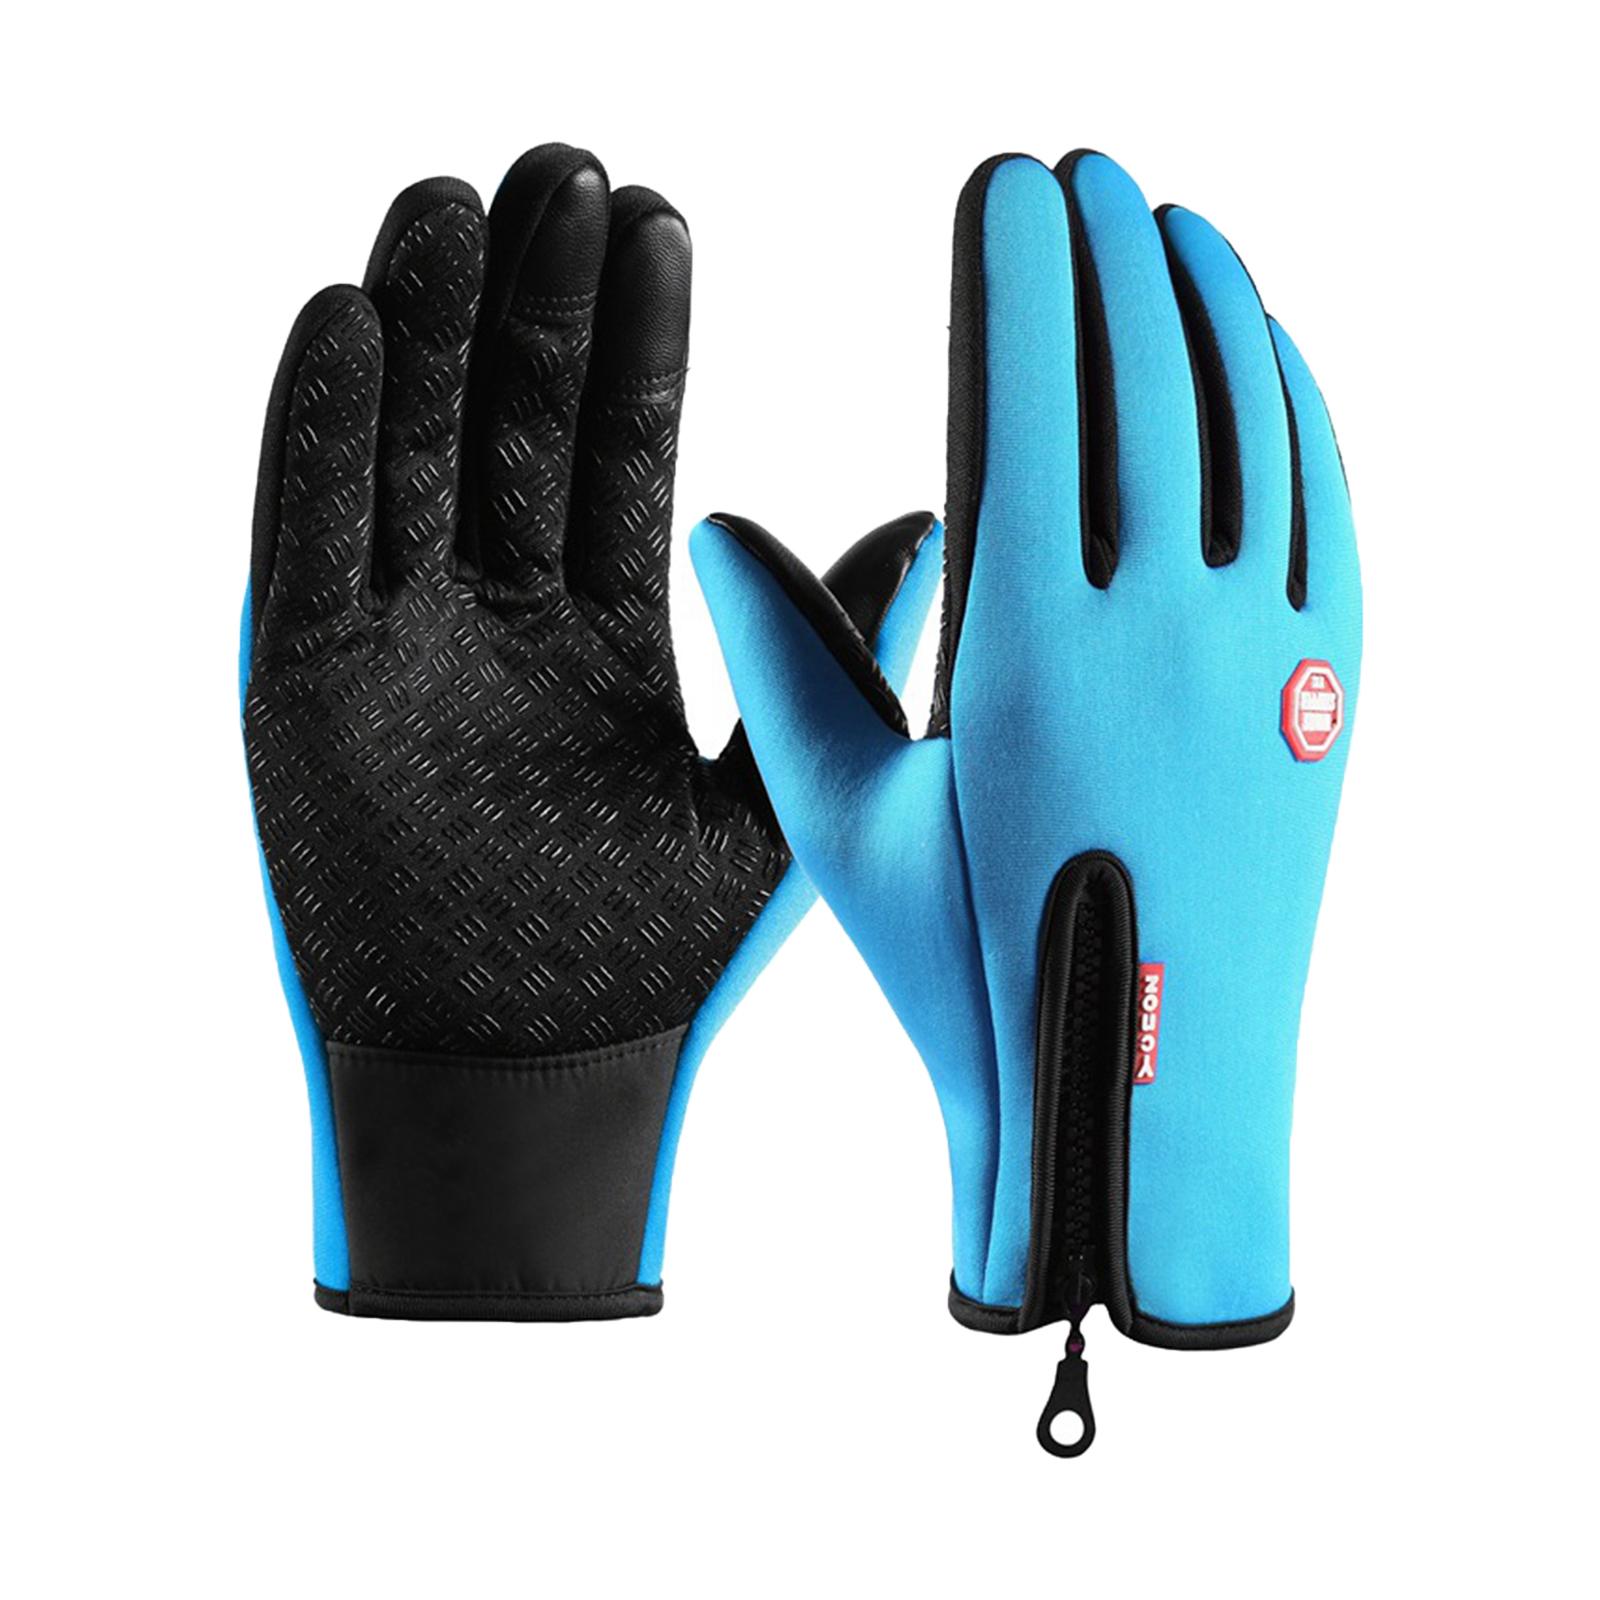 Winter Gloves Windproof Insulated for Motorcycle Cycling Adults Unisex S Blue